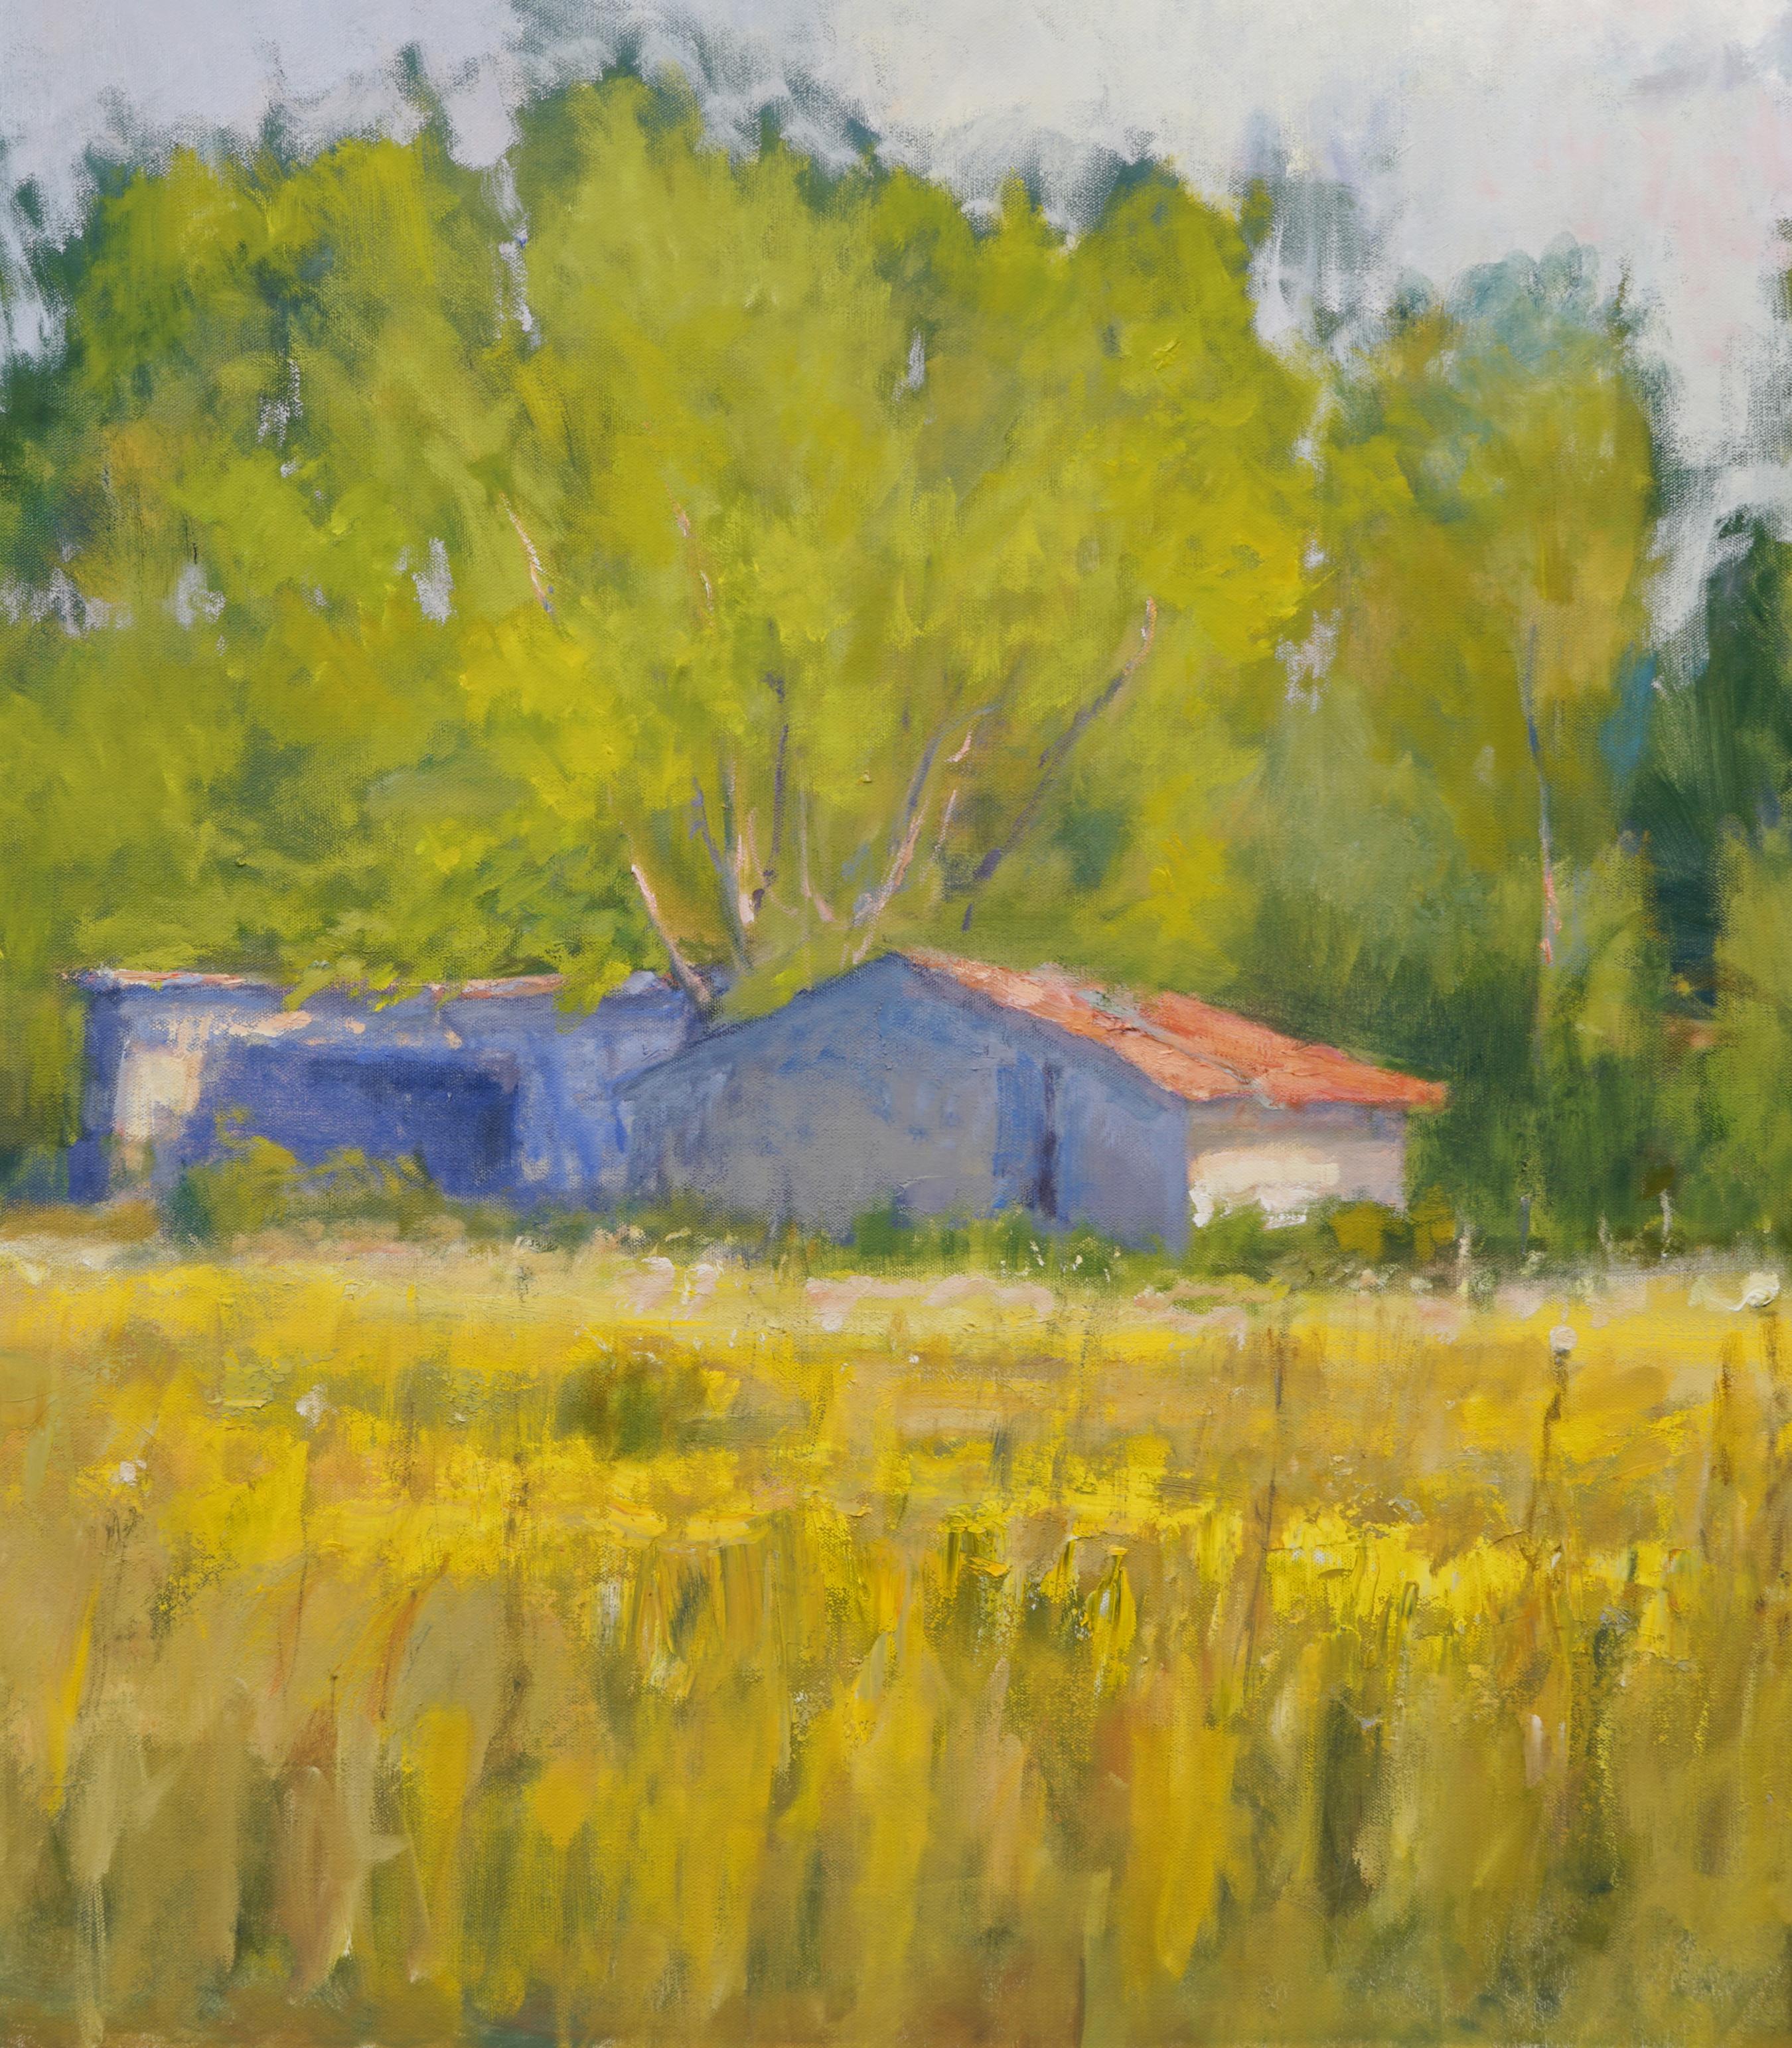  Late Afternoon , Texas Landscape, Oil, American Impressionism, Barn, Sun 36x36 - Brown Landscape Painting by Steve Parker